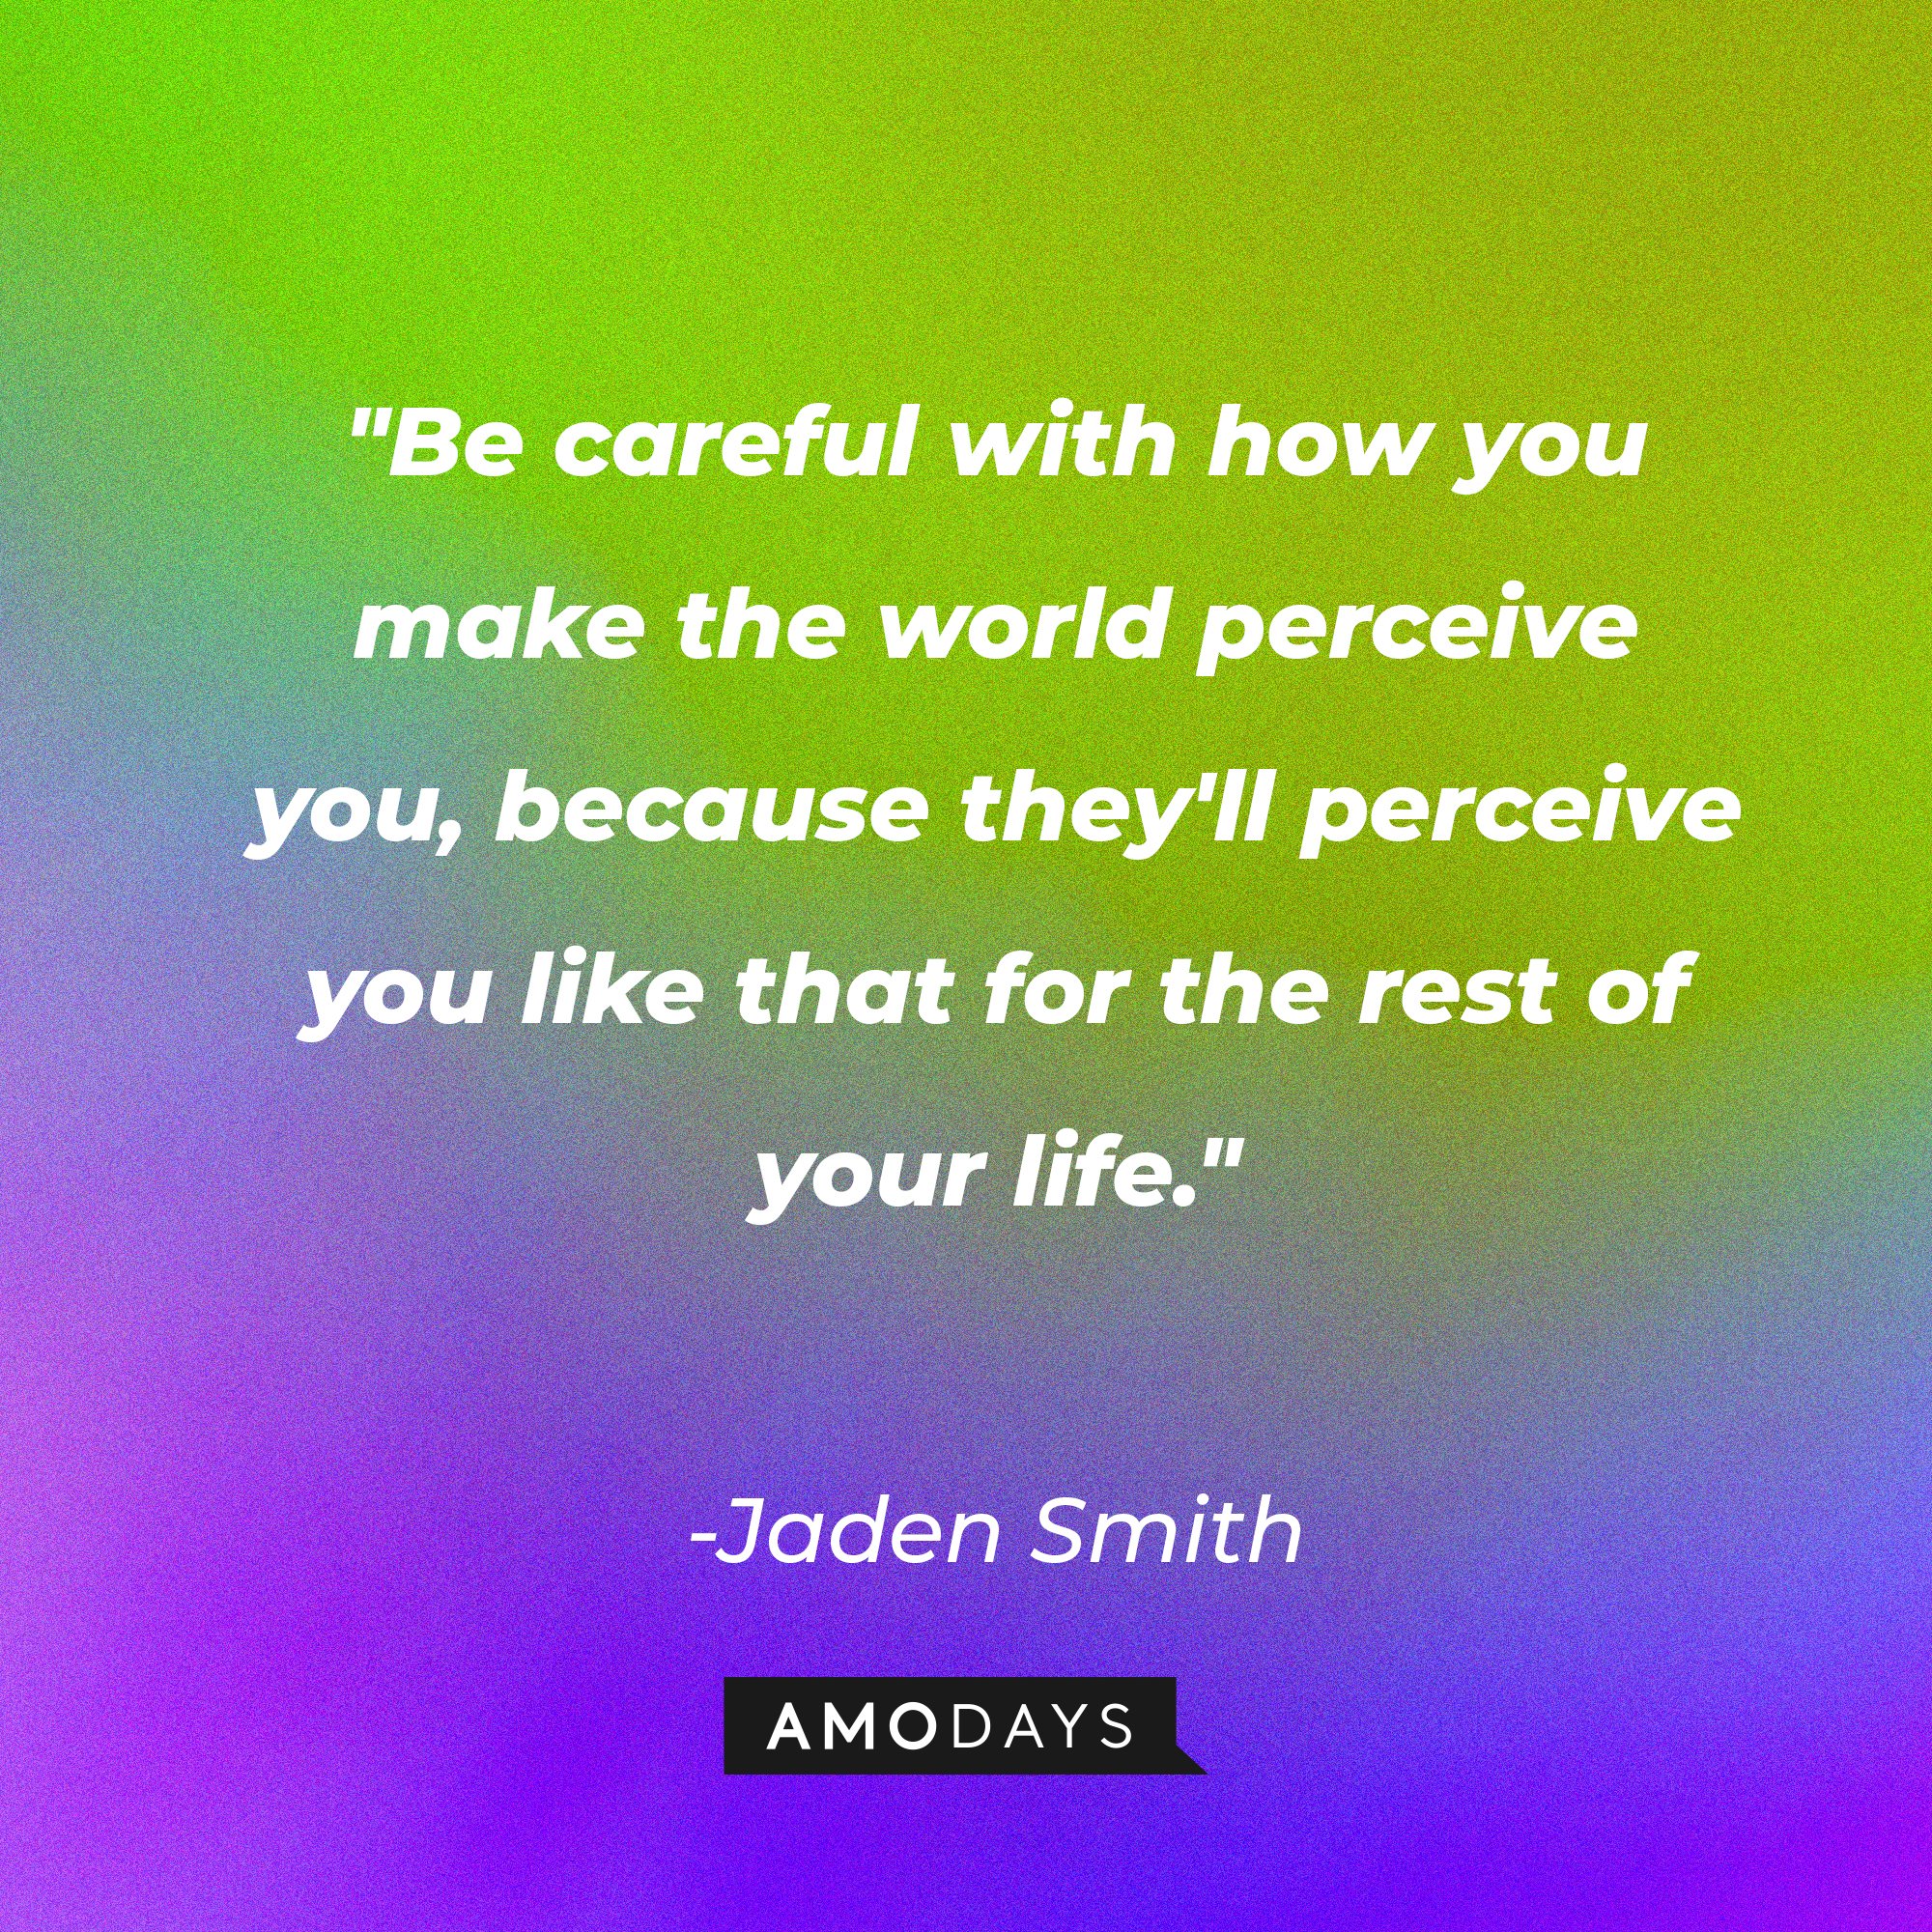 Jaden Smith's quote: "Be careful with how you make the world perceive you, because they'll perceive you like that for the rest of your life." | Image: AmoDays